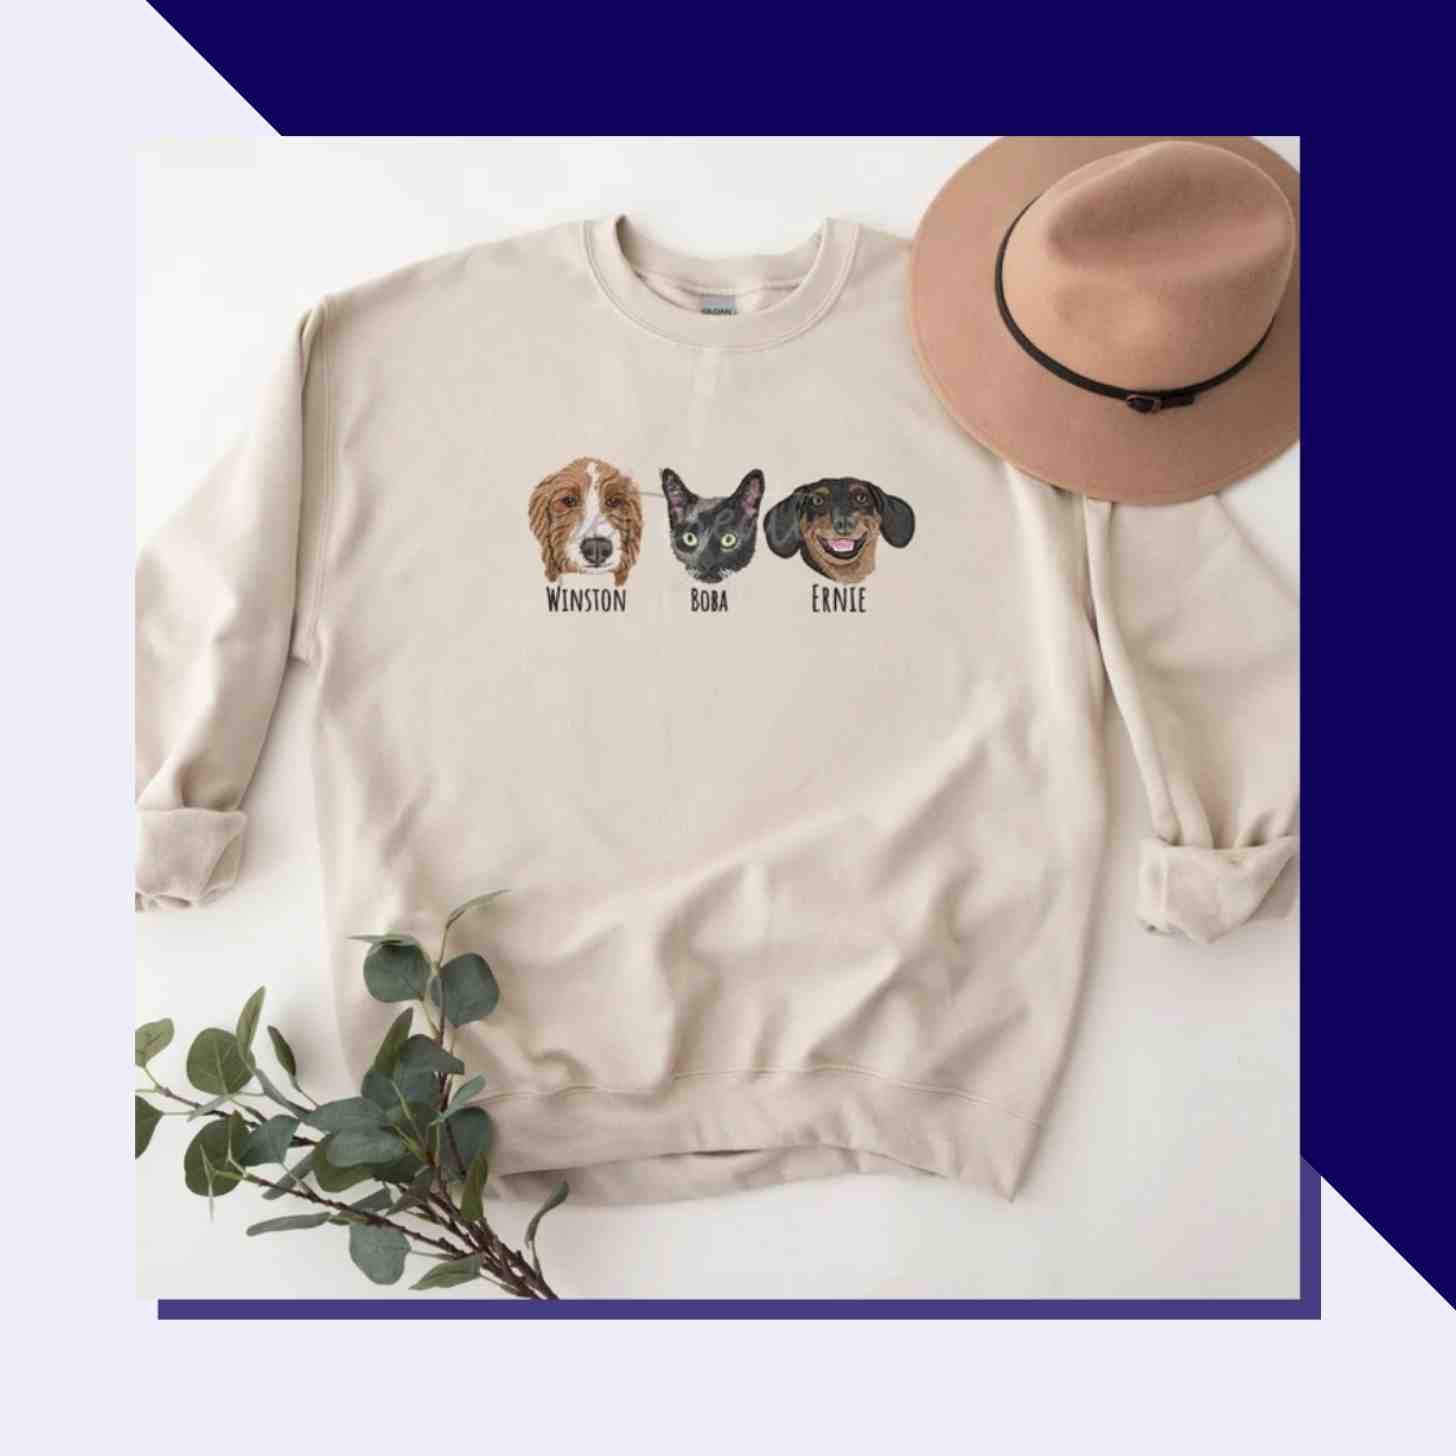 A Custom Made Sweatshirt With Your Animal Friends Embroidered On It